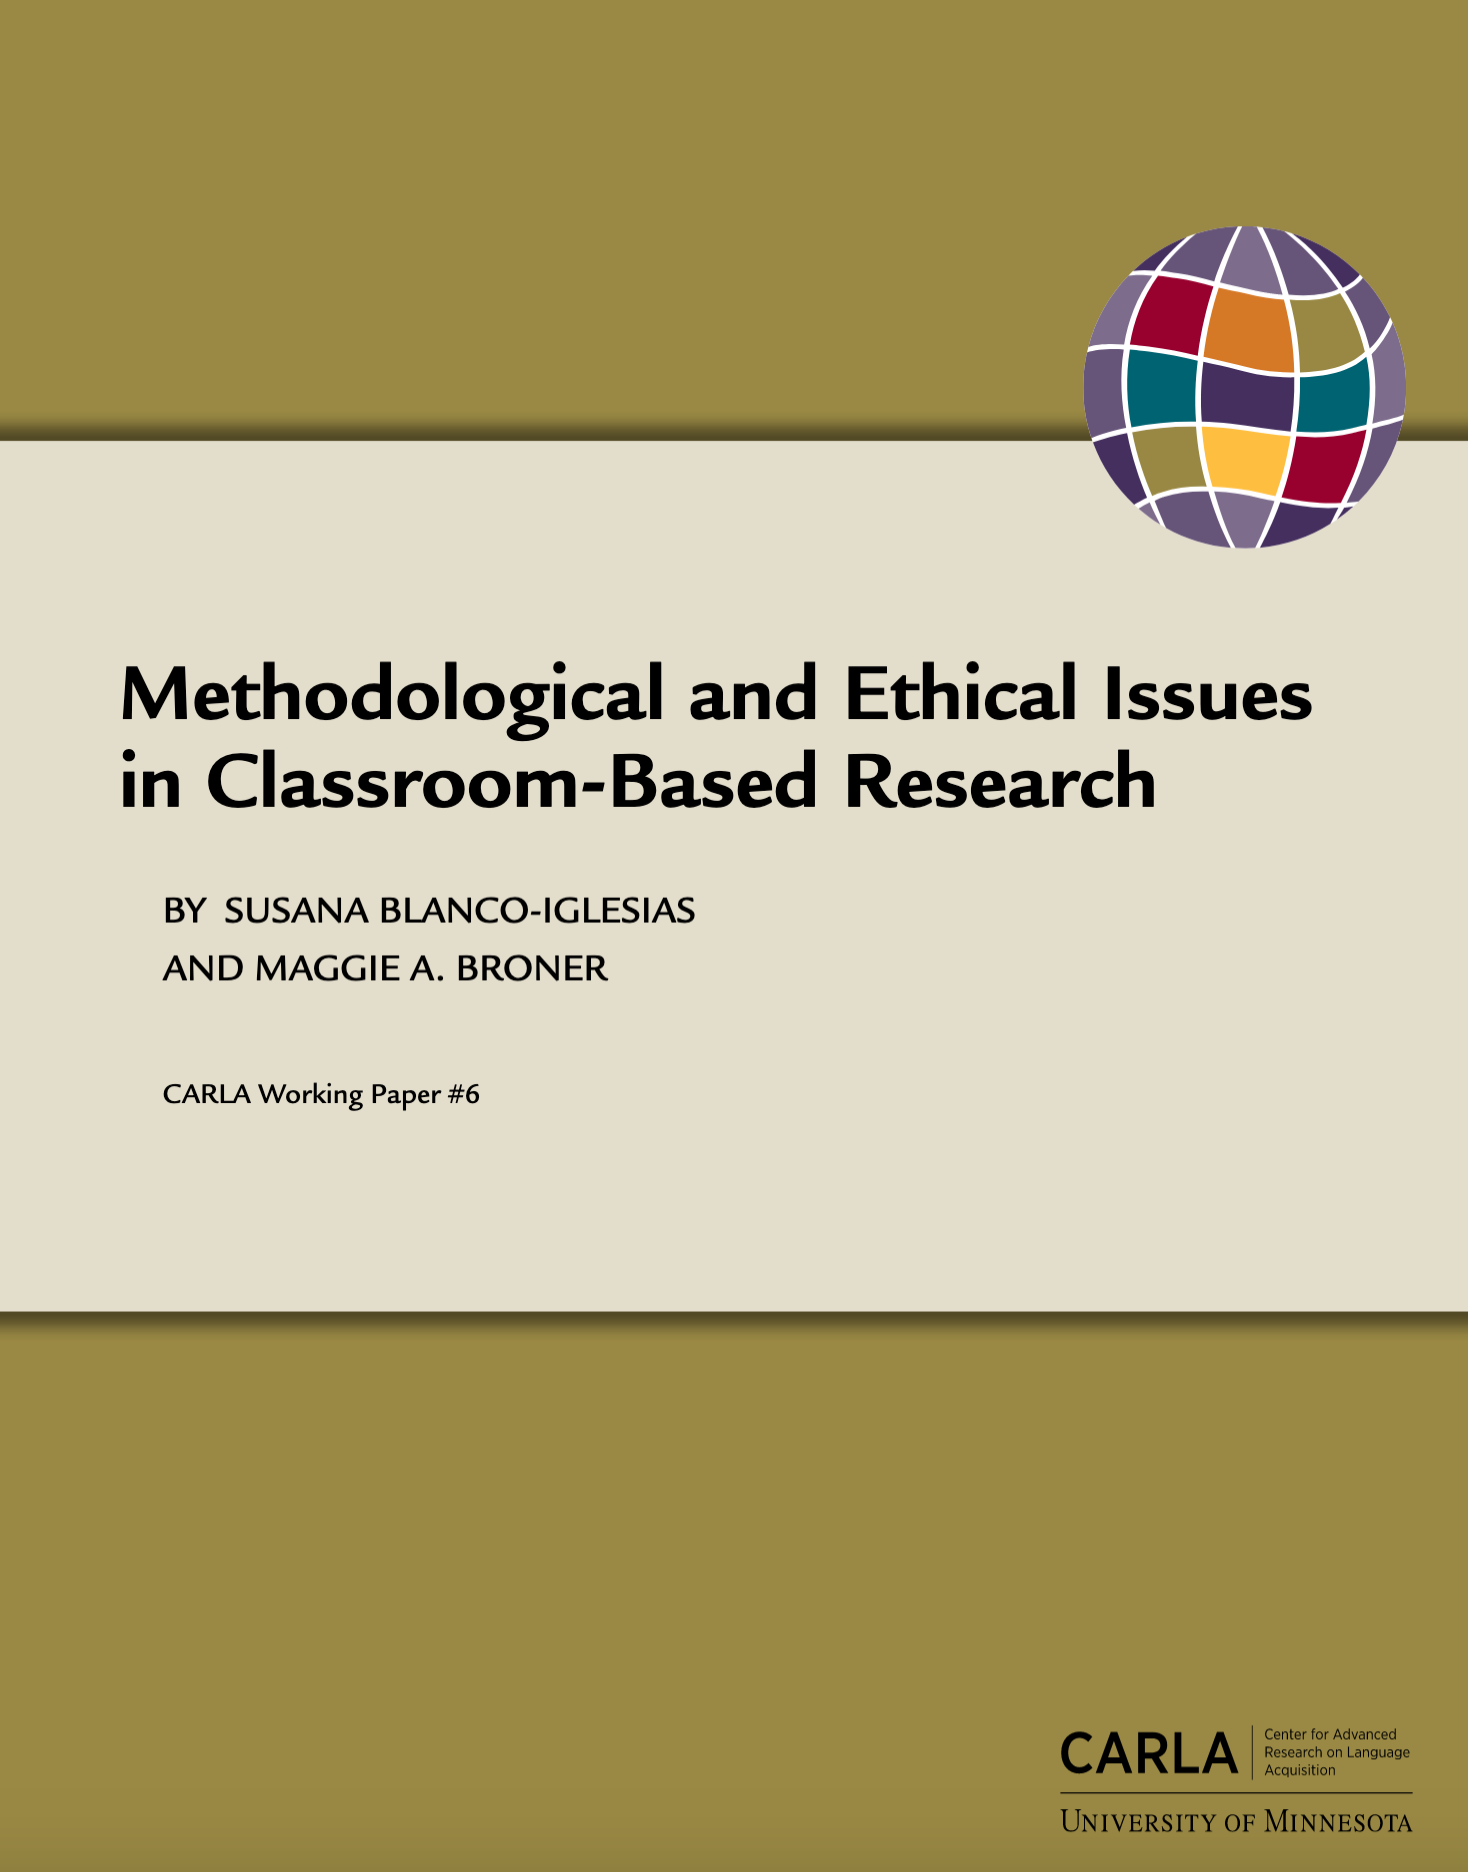 Methodological and Ethical Issues in Classroom-Based Research